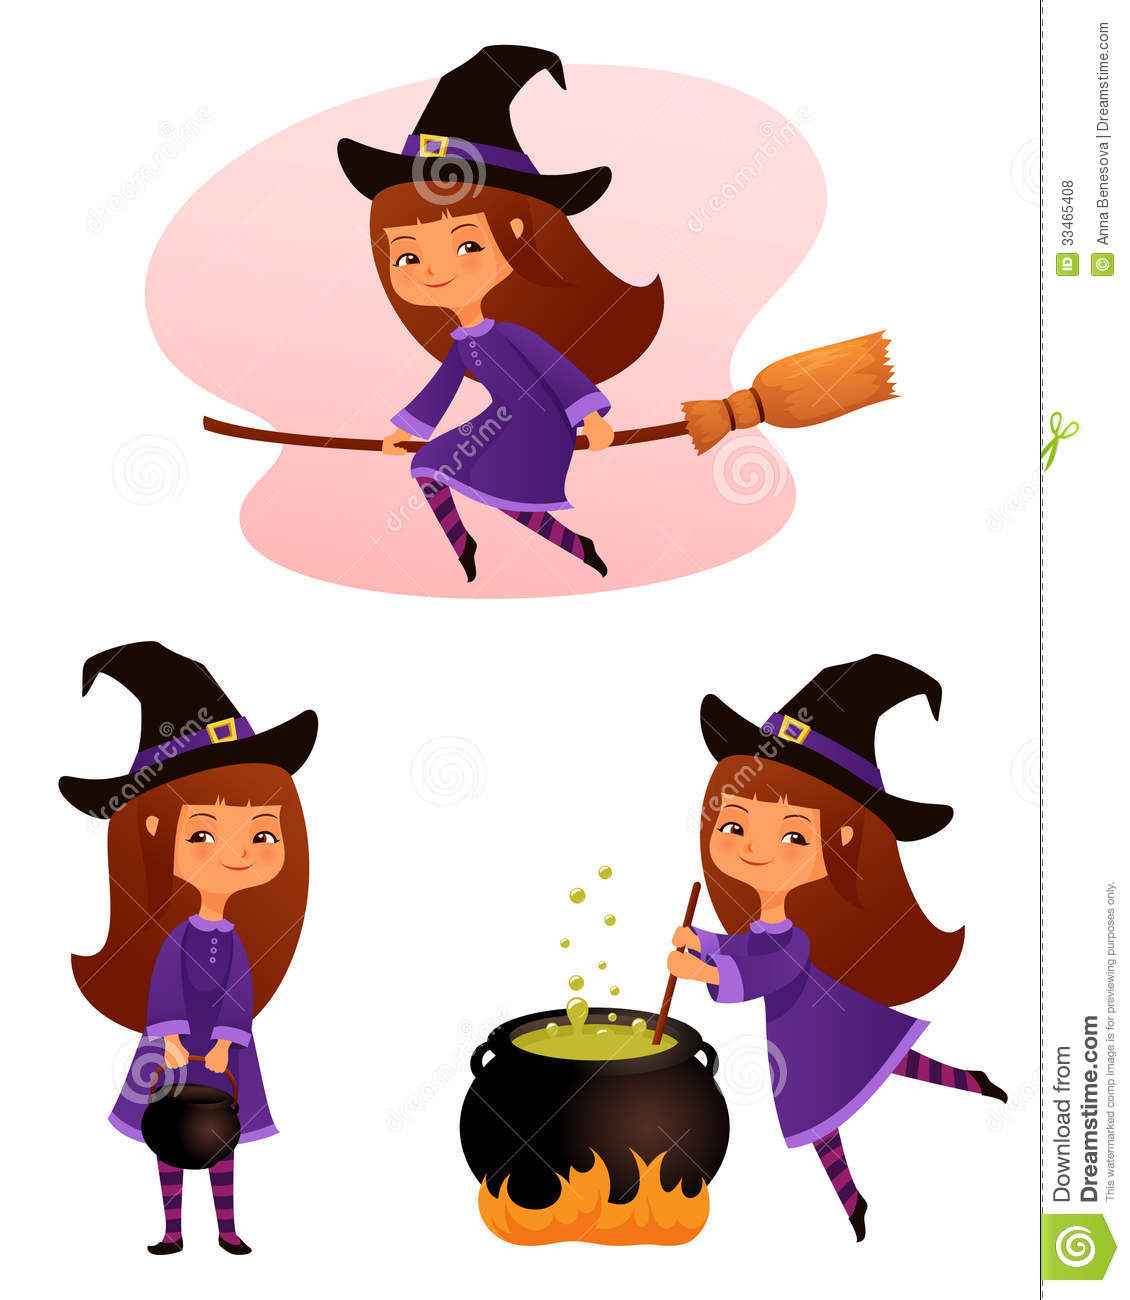 Cute Happy Halloween Clip Art Witches Halloween Illustration Of A Cute